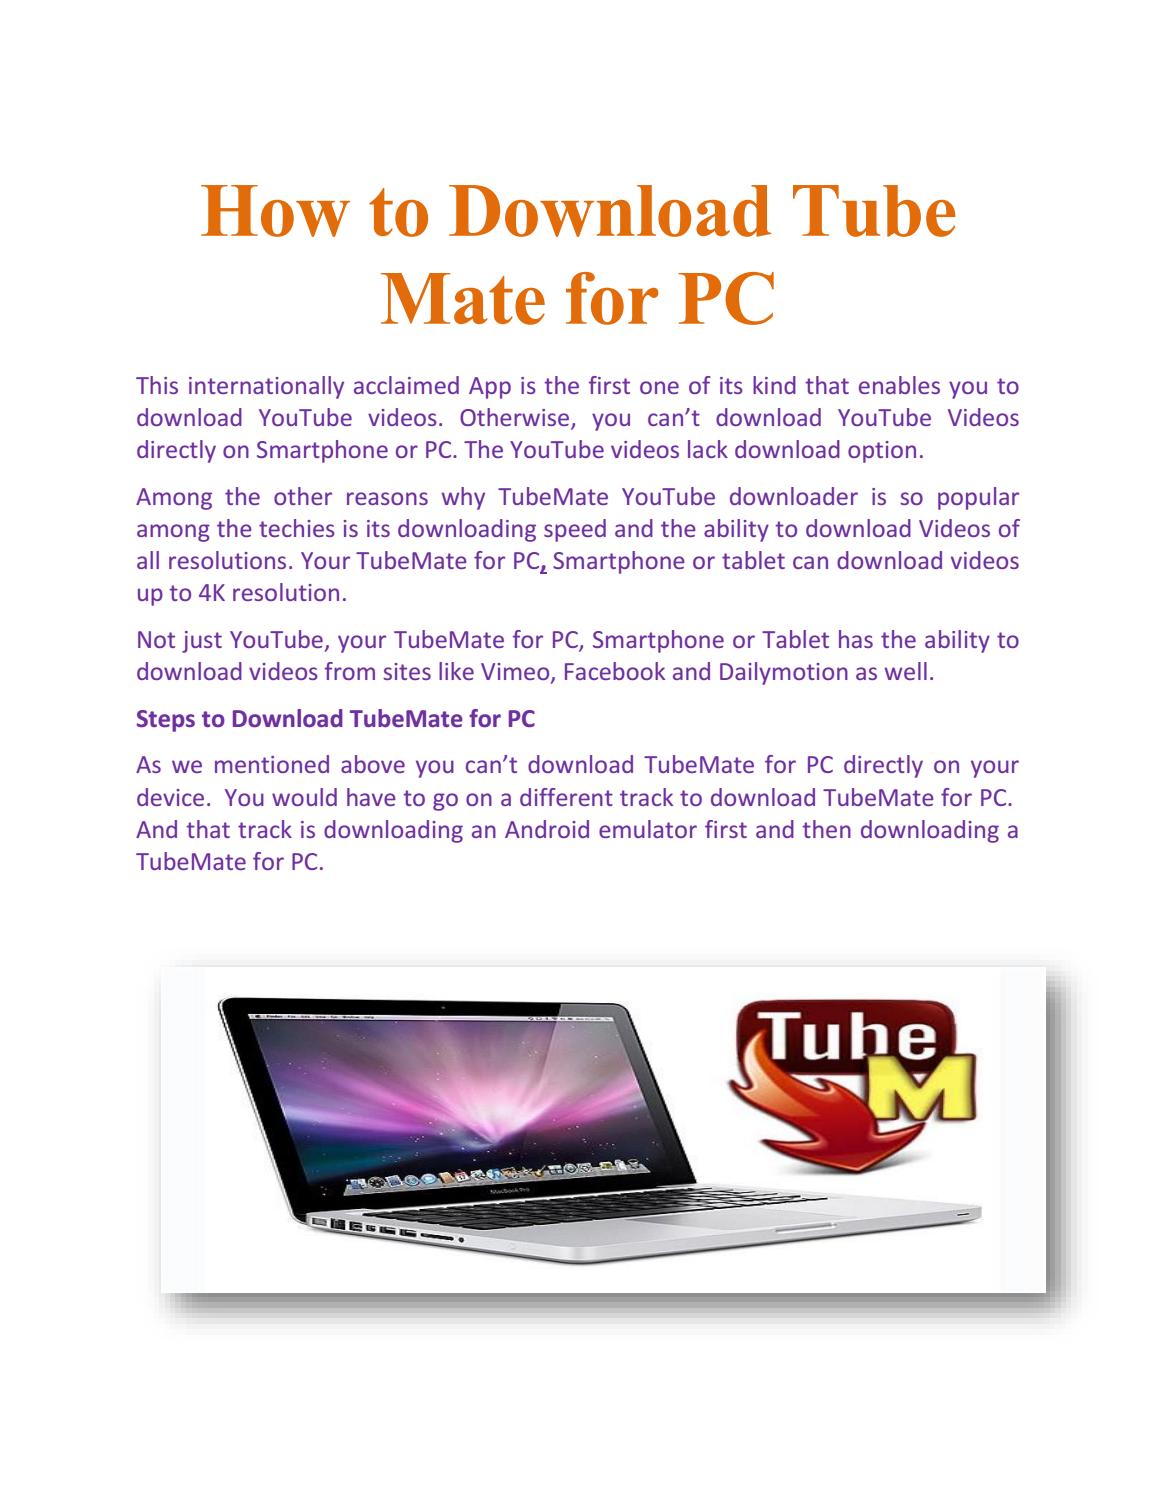 tubemate downloader free for pc